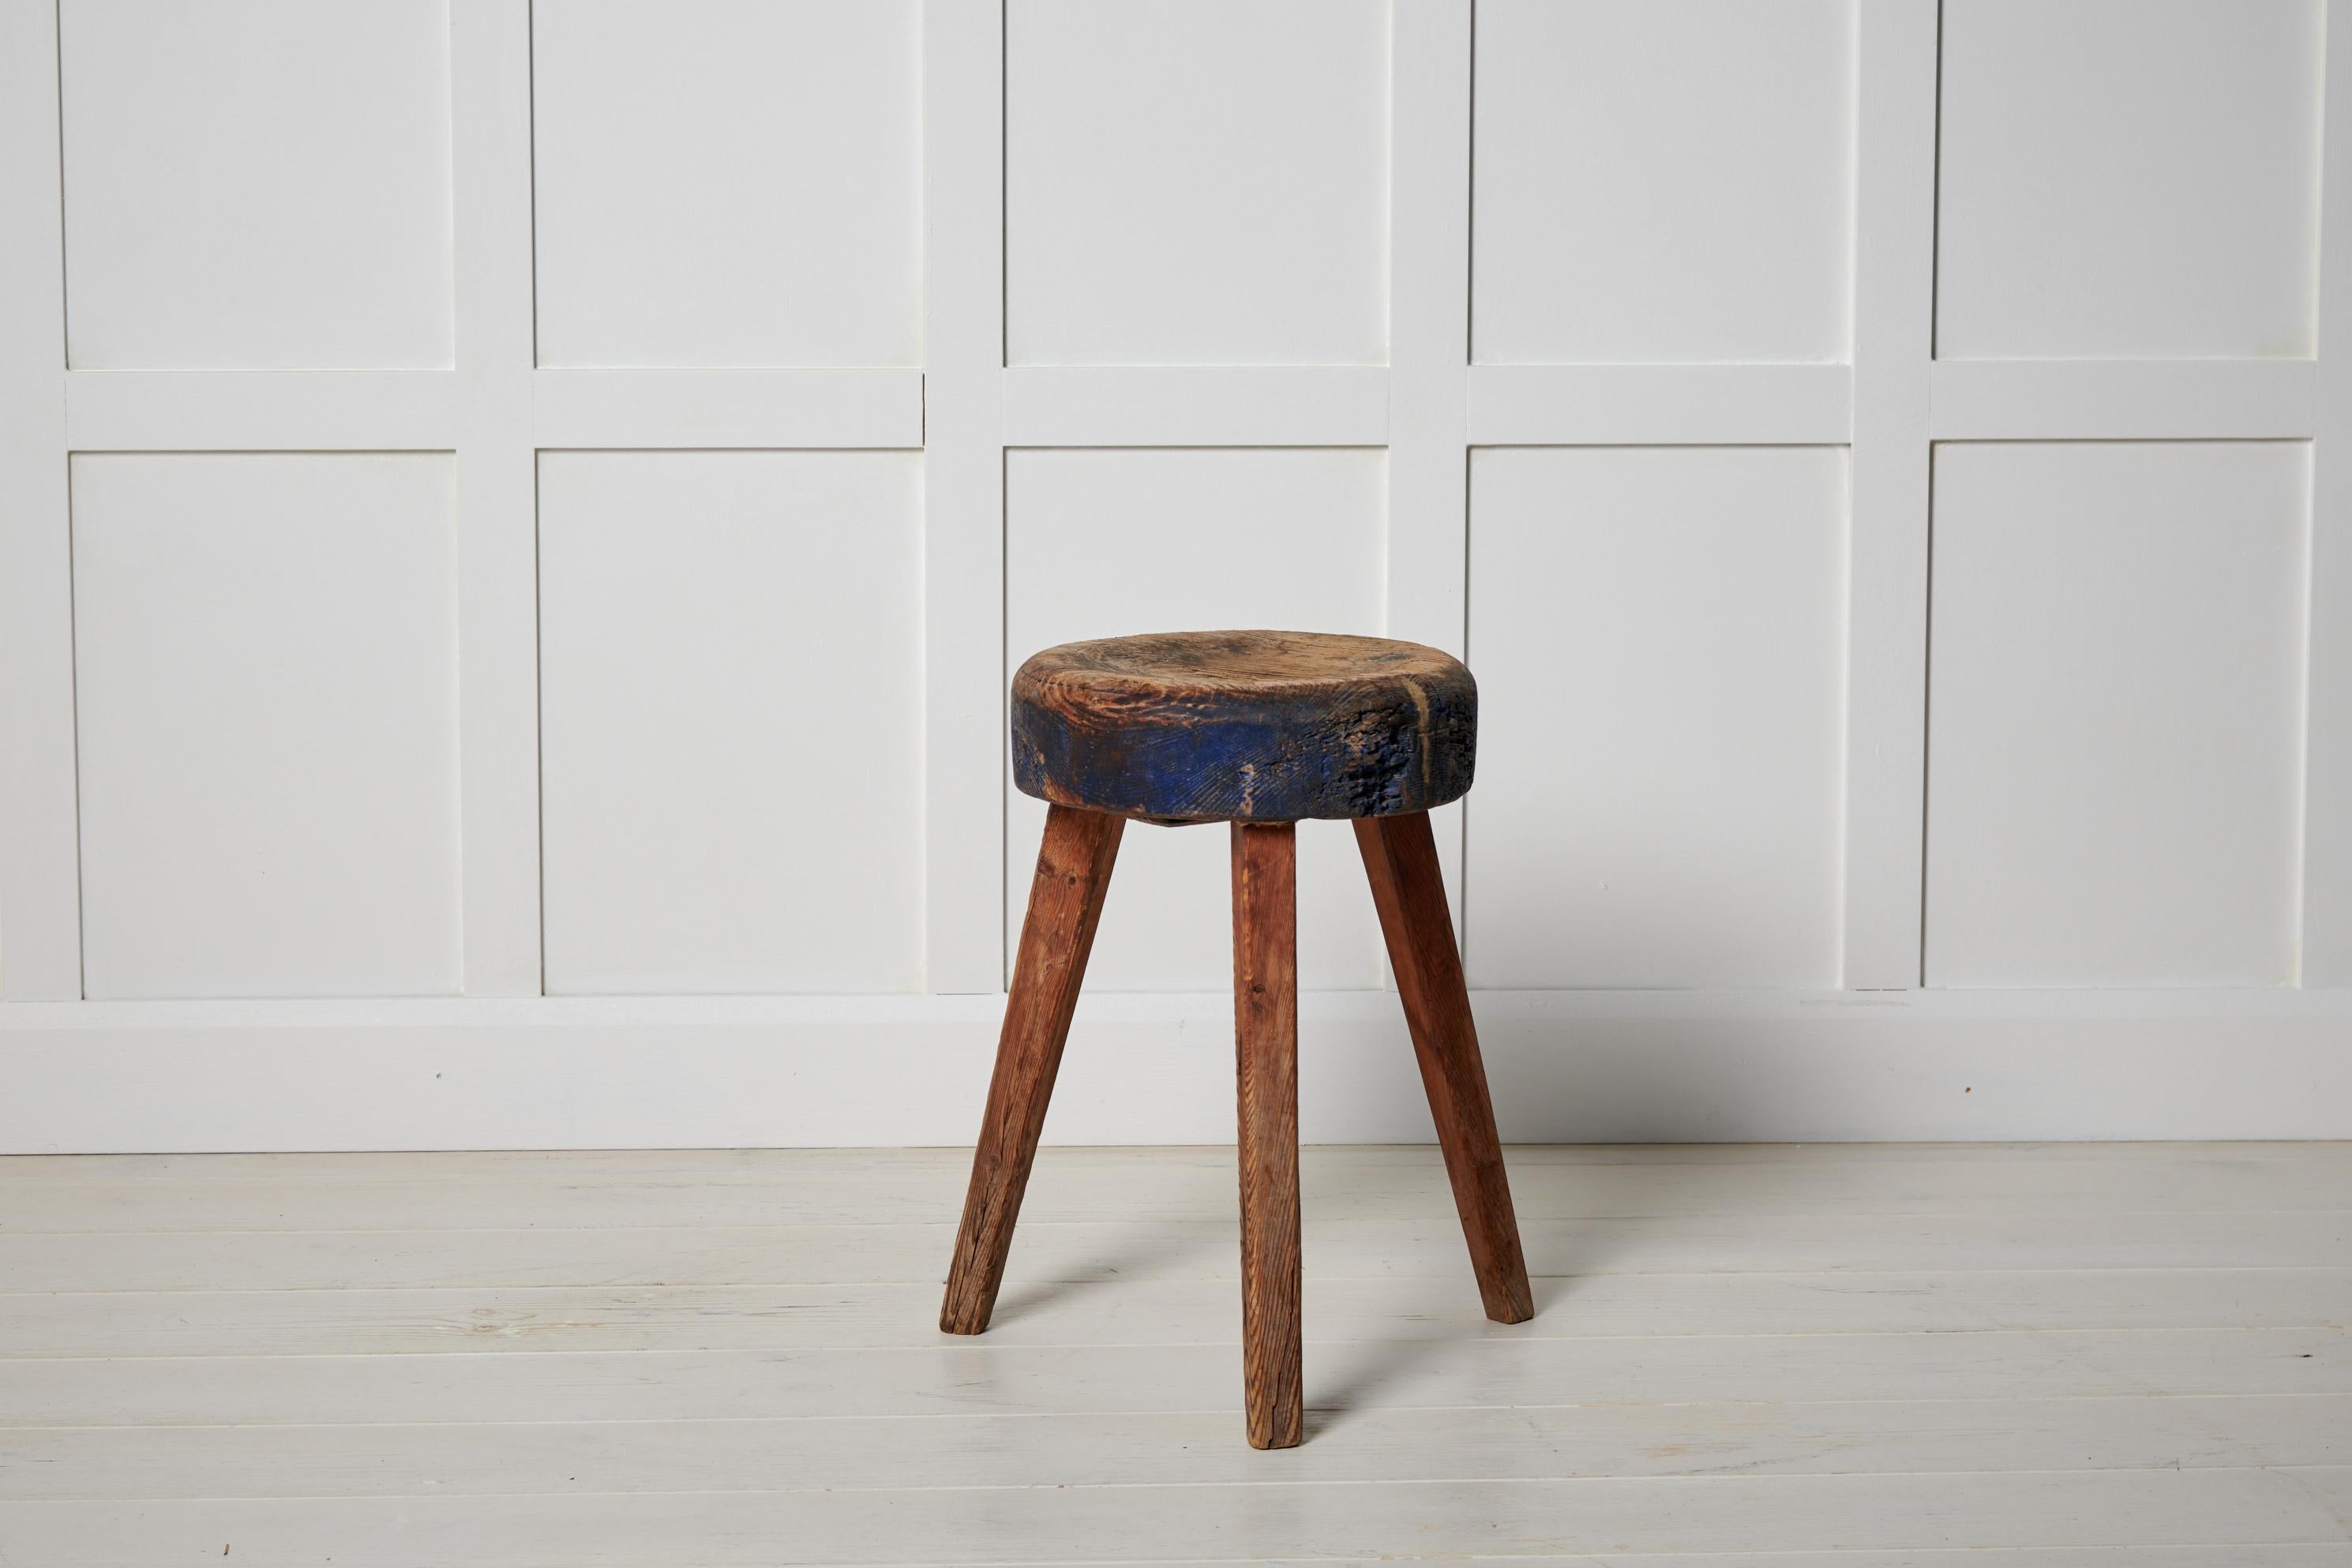 Antique Swedish country stool made in northern Sweden around the mid 1800s. The stool is made by hand from solid pine. It has a round, unusually thick seat with three legs. In charming, untouched original condition with the authentic patina. Some